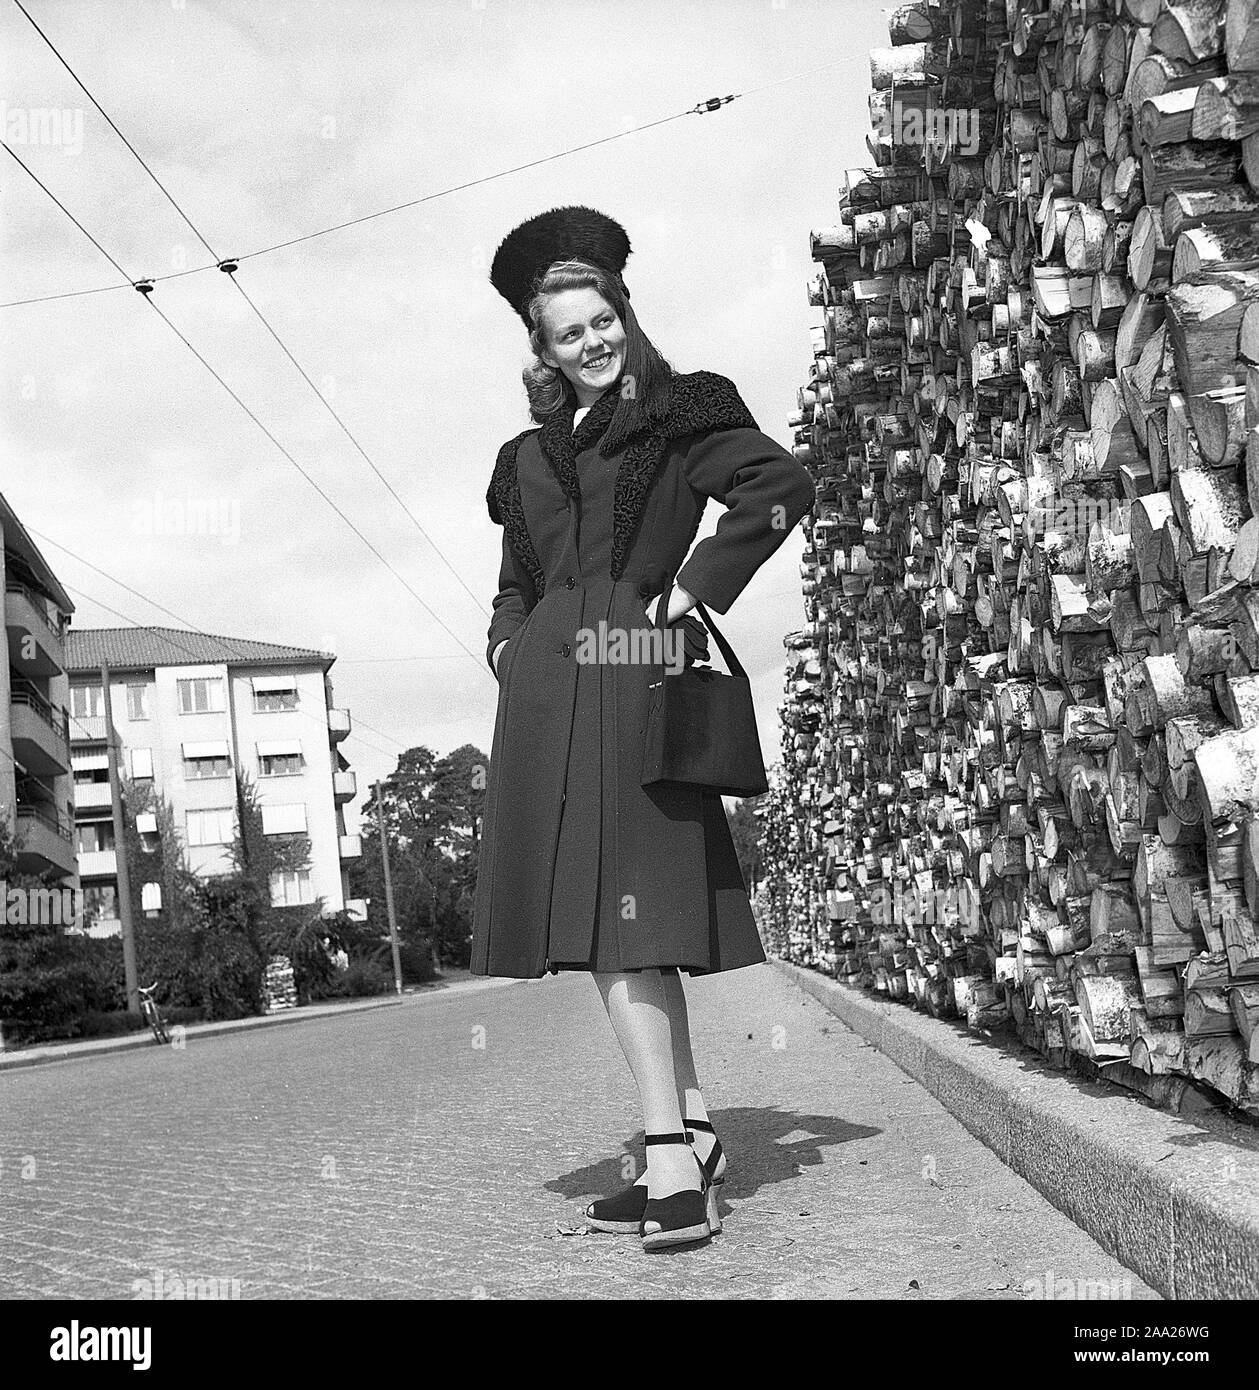 Women's fashion in the 1940s. A young woman in a typical 1940s coat with matching hat, shoes and handbag. It's postwar Sweden and there is still a shortage of fuel and coal for heating, and the piles of firewood is visible in the background. Kristoffersson Ref V78-6. Sweden 1947 Stock Photo